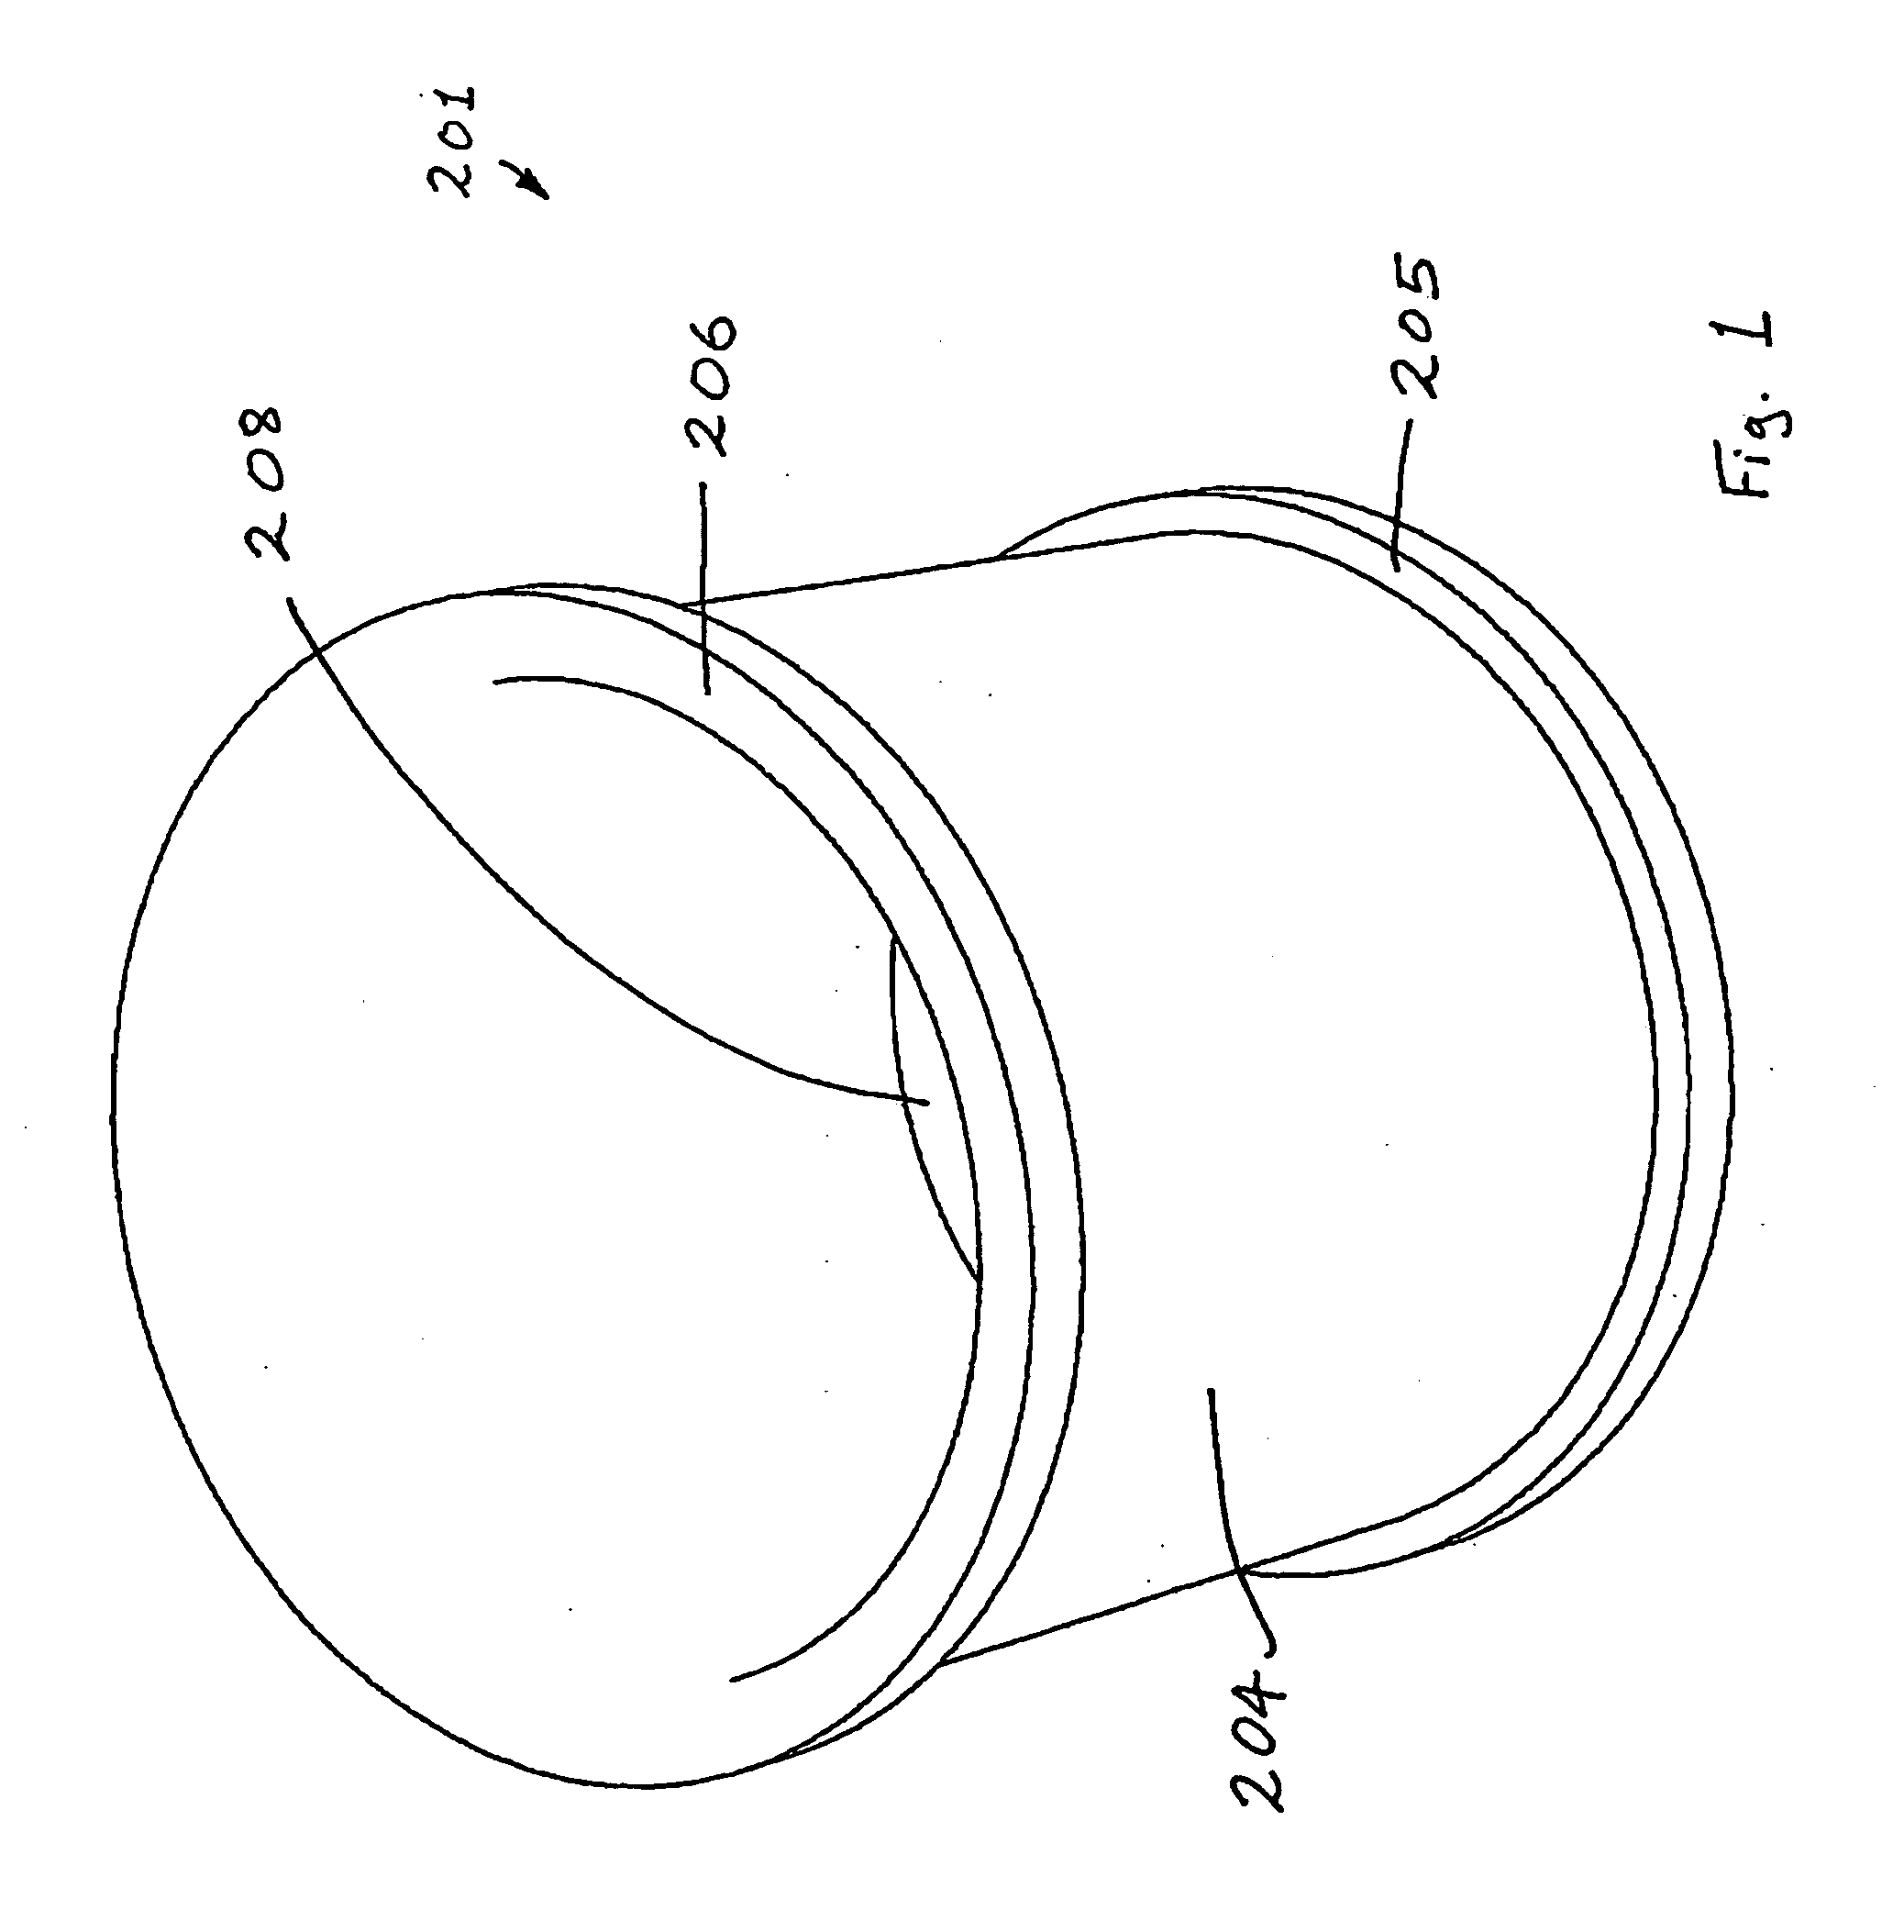 Surgical sealing device